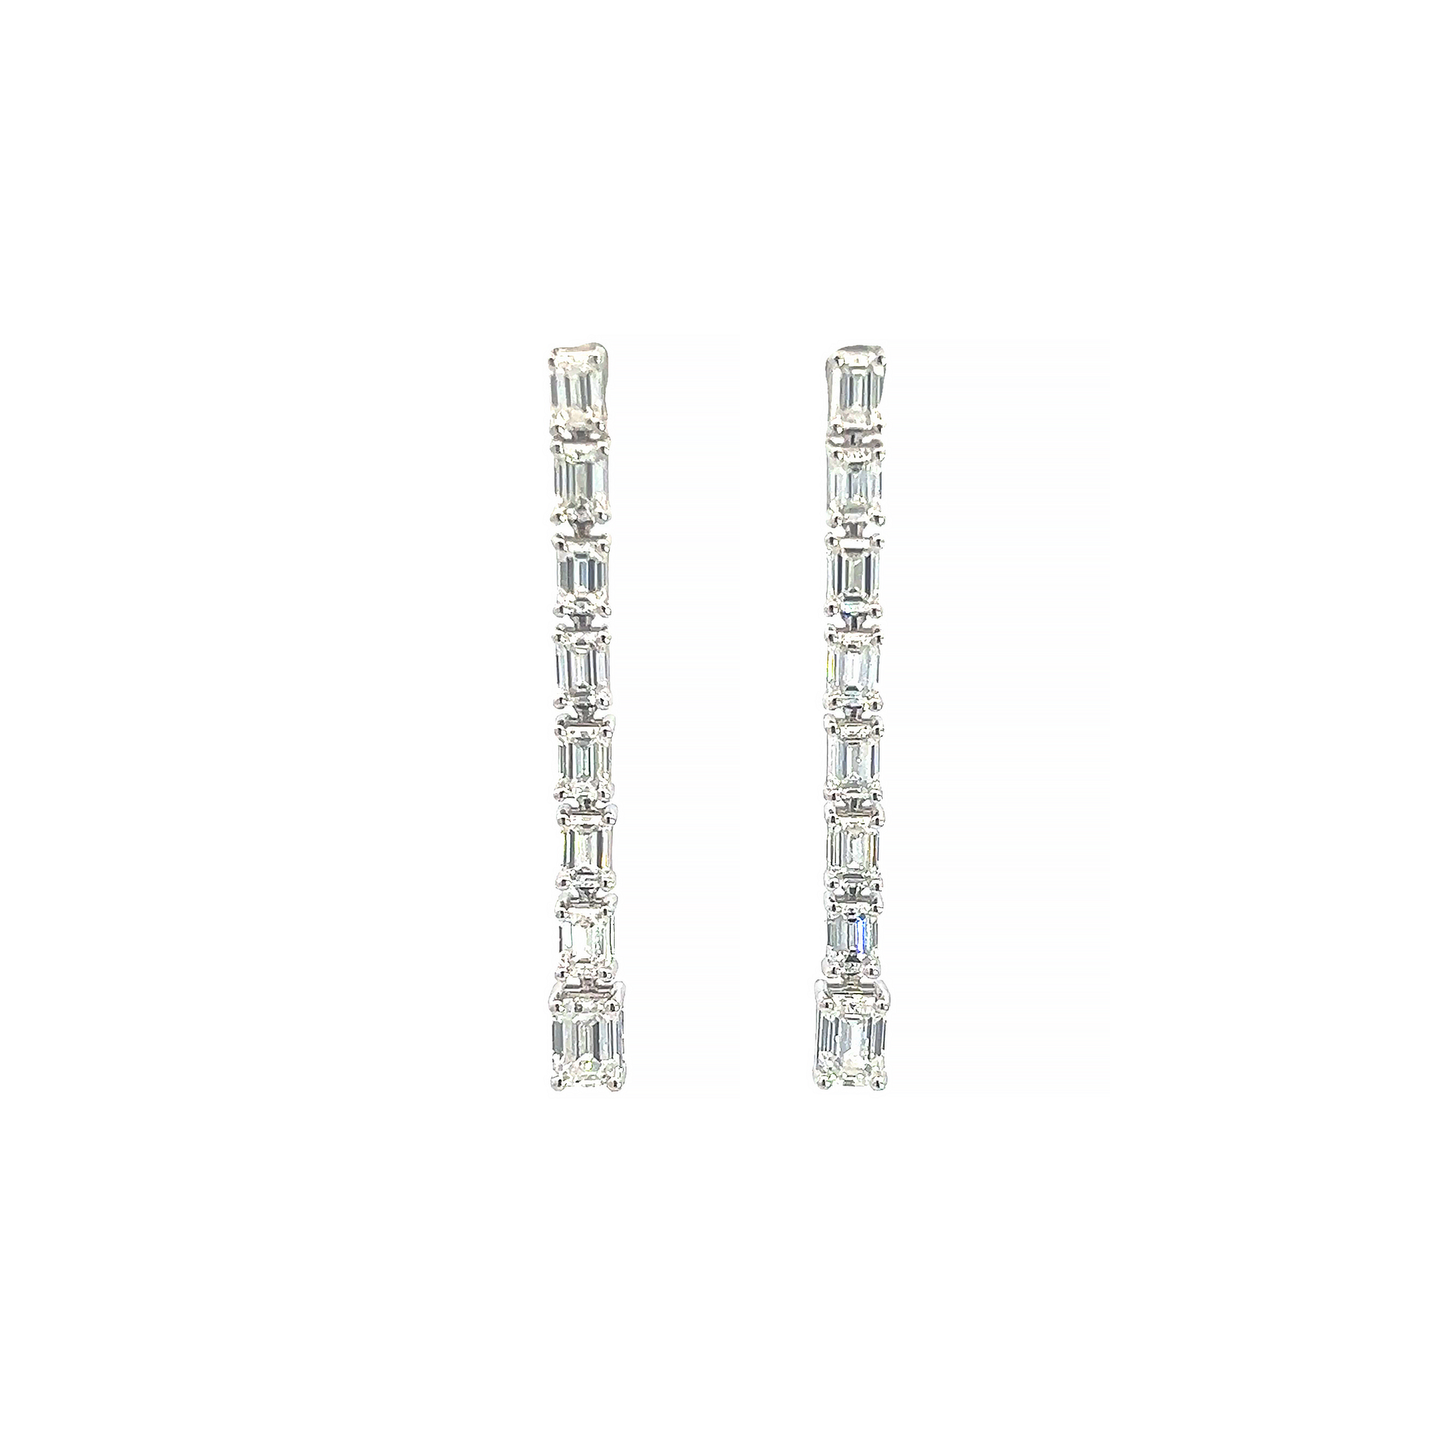 Emerald Allure: Lab Grown Diamond Earrings Featuring a Central Diamond in Exquisite Emerald Cut – Elegance Redefined